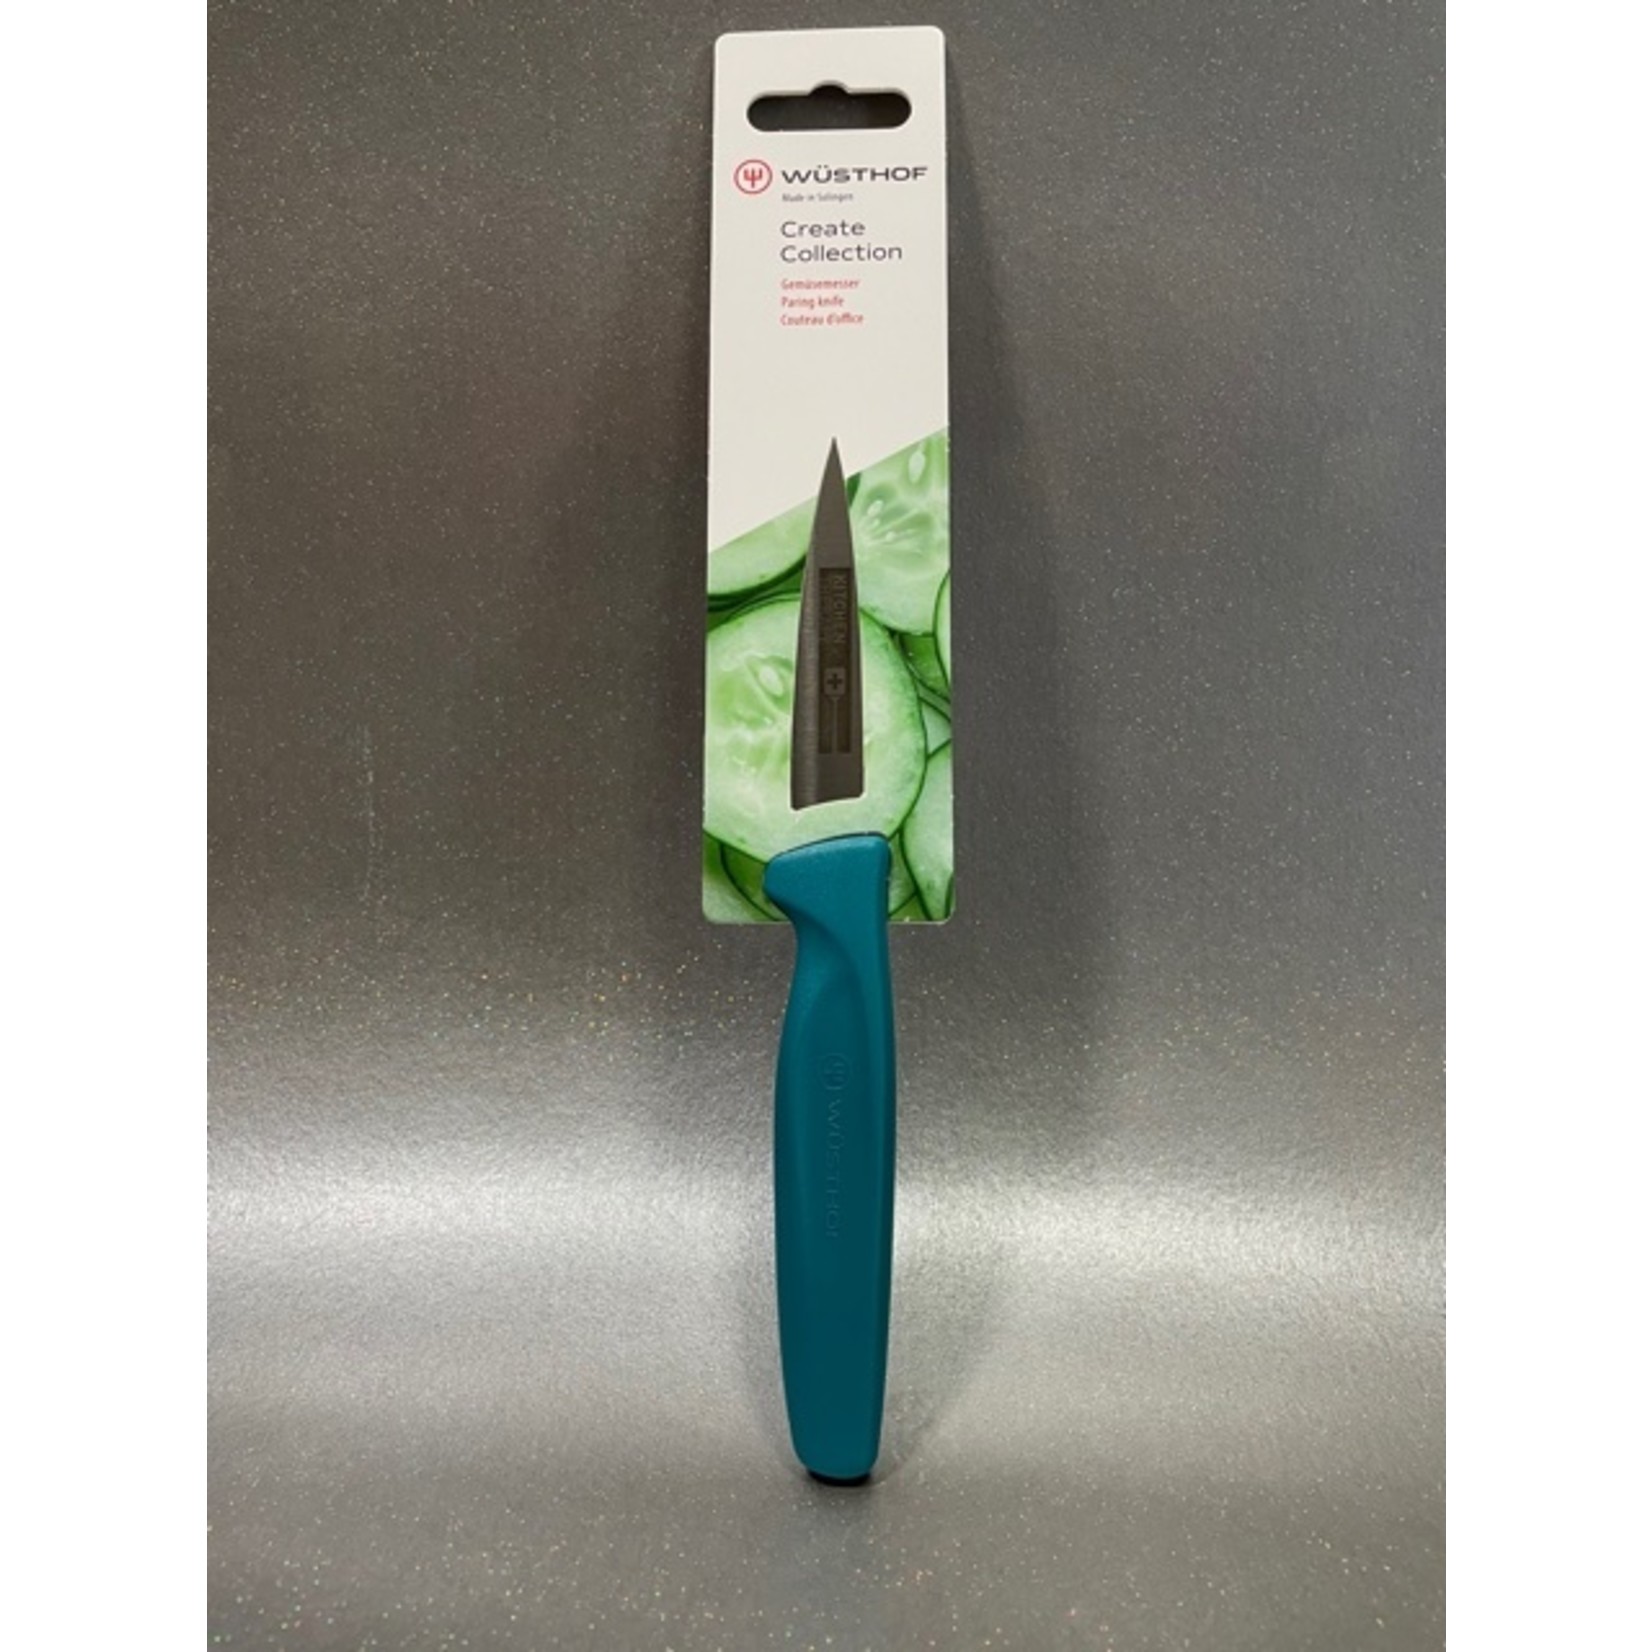 WUSTHOF WUSTHOF Kitchen Therapy Sheepsfoot Paring Knife  3" - Teal